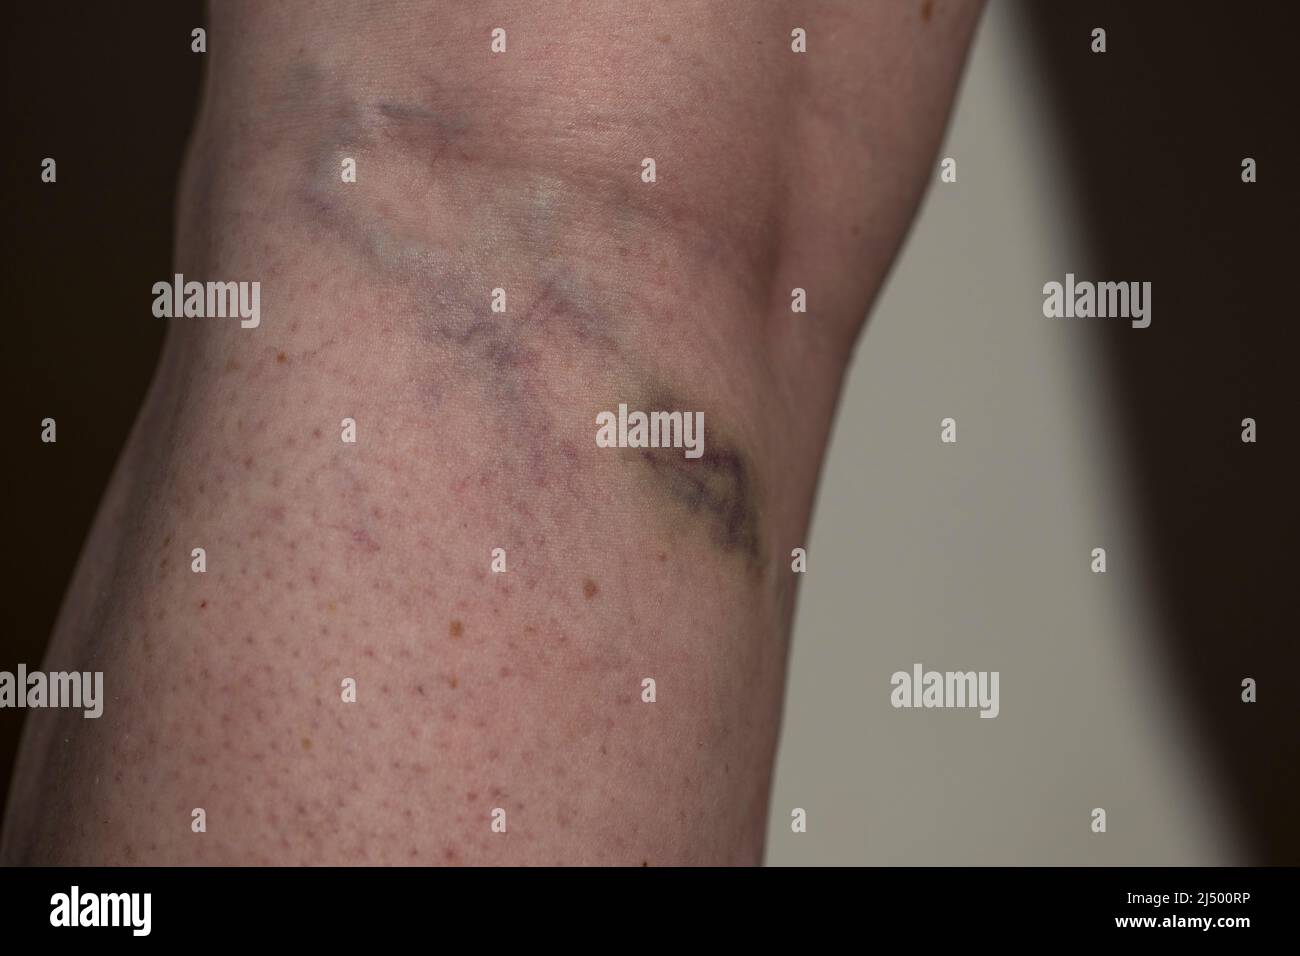 Varicose veins and bruise on back of leg Stock Photo